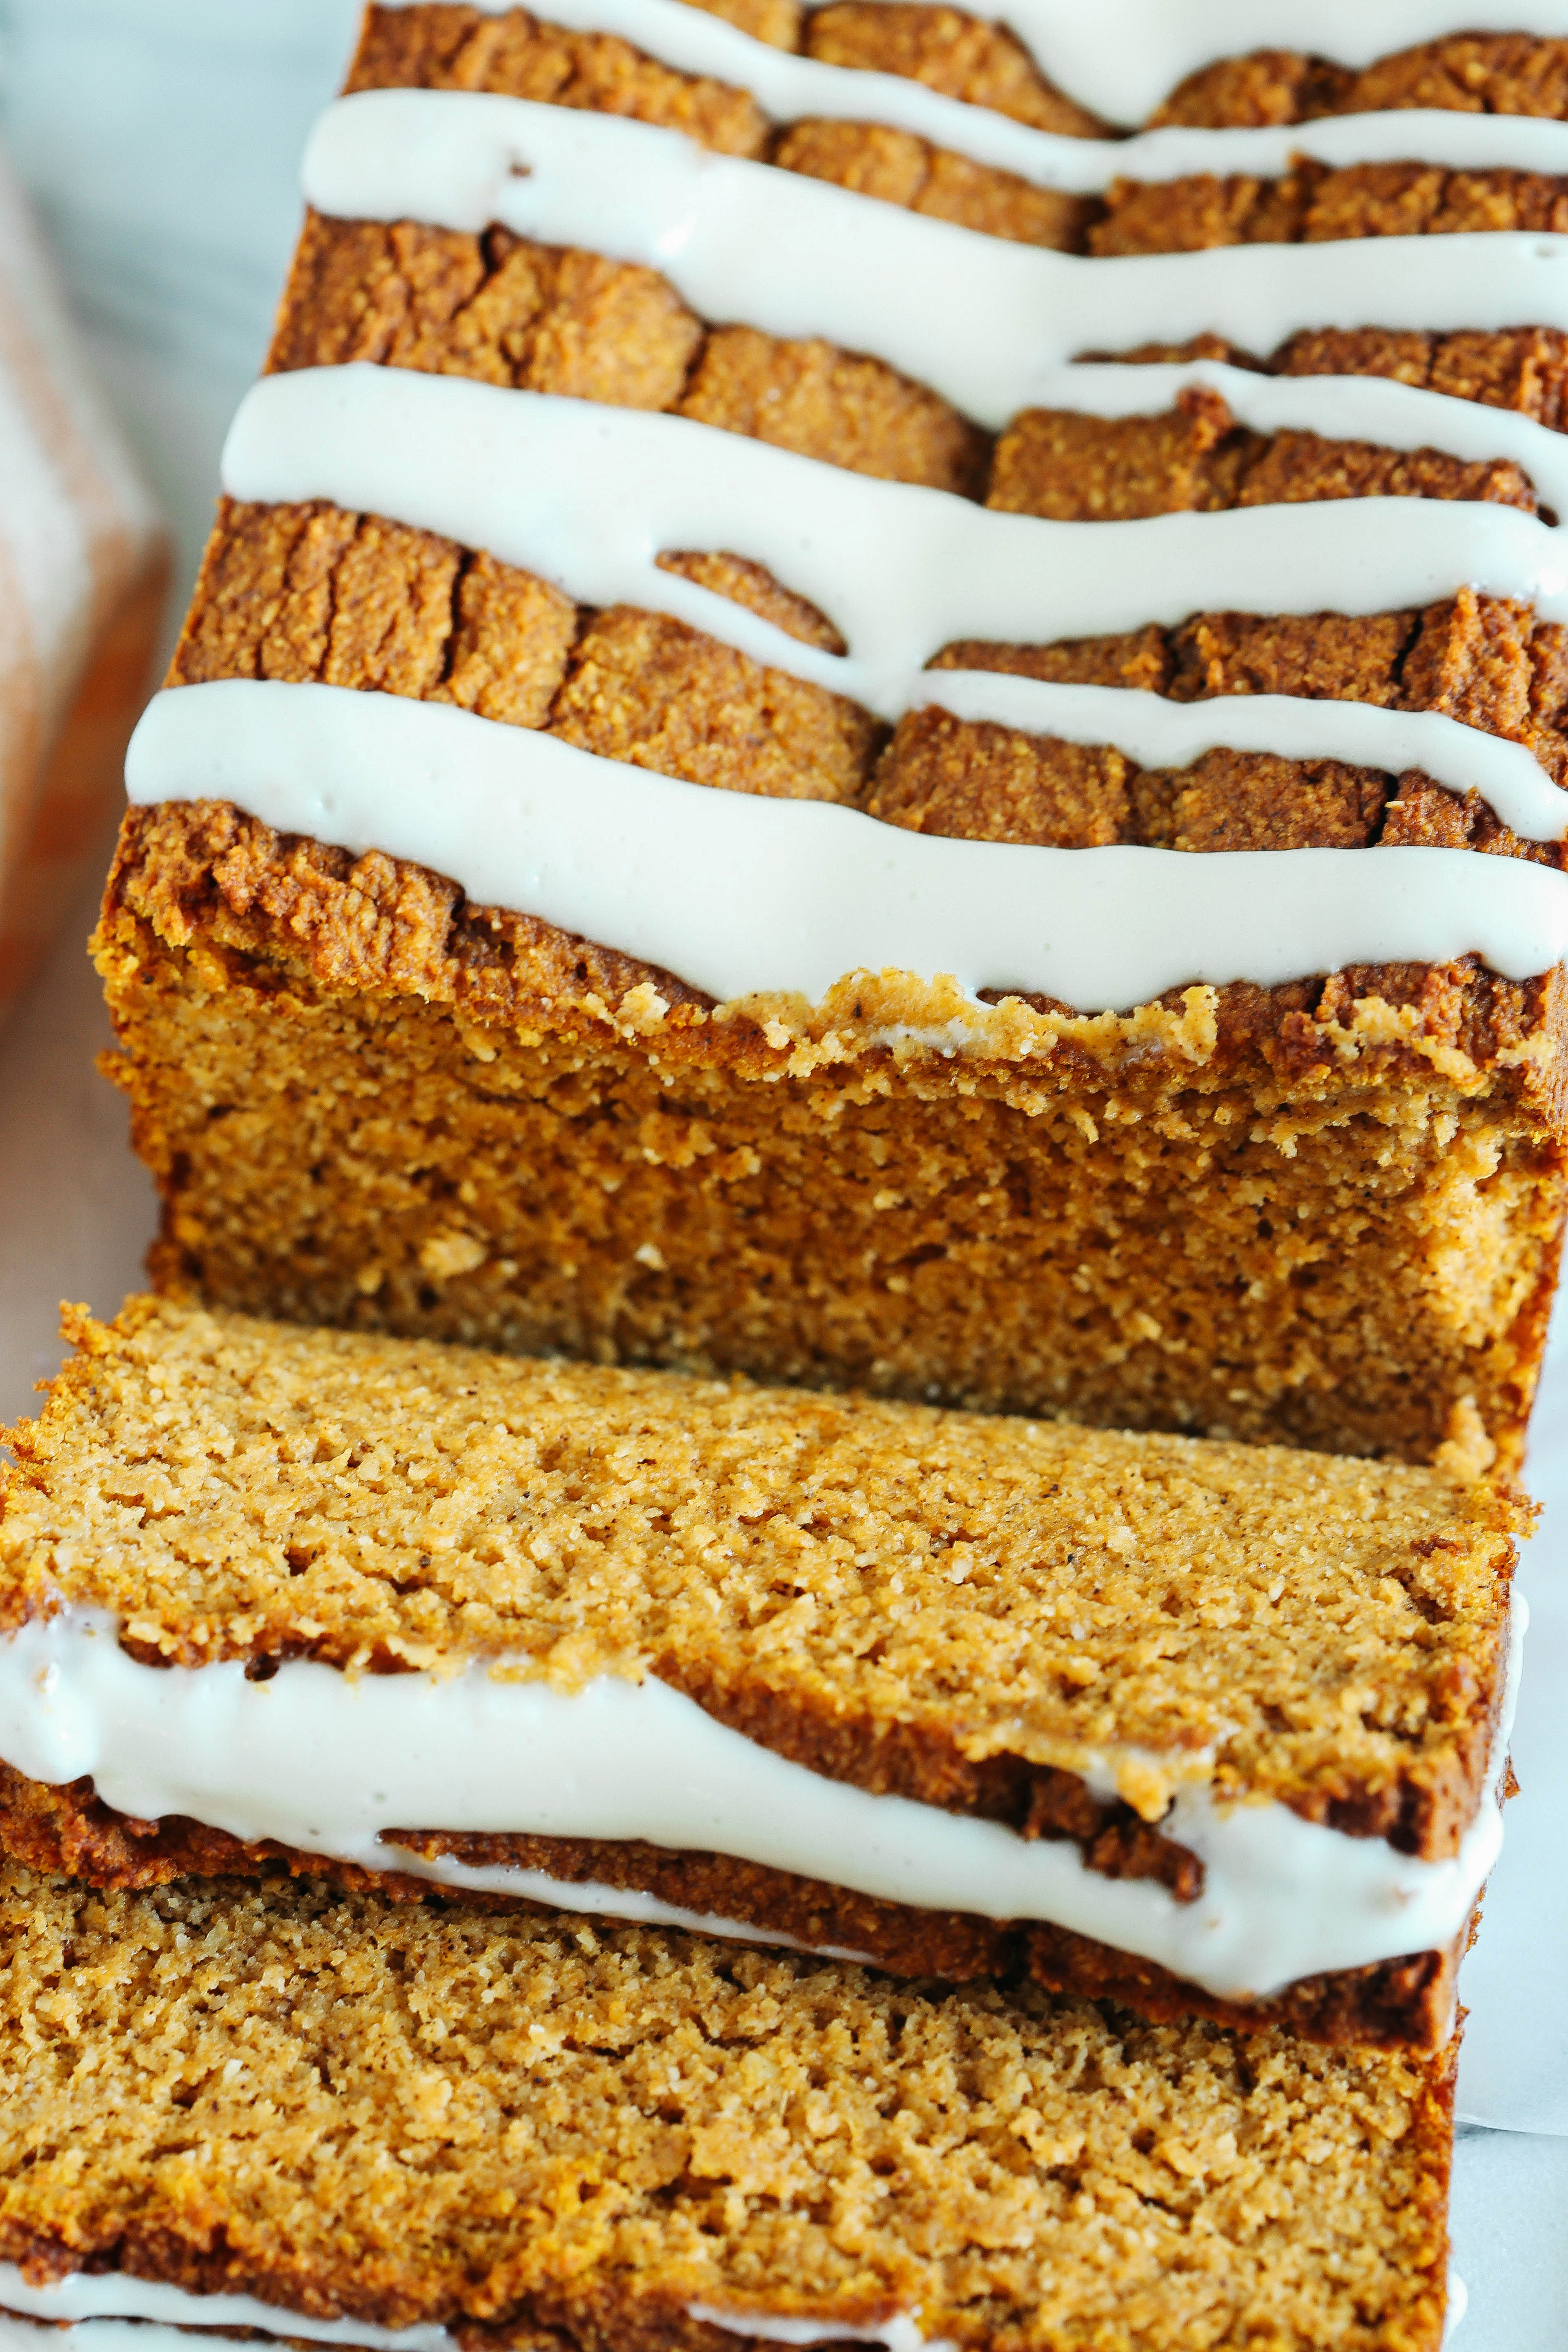 The BEST Almond Flour Pumpkin Bread recipe that is a must to make this fall!  Super moist, easy to make and drizzled with a delicious cream cheese glaze!